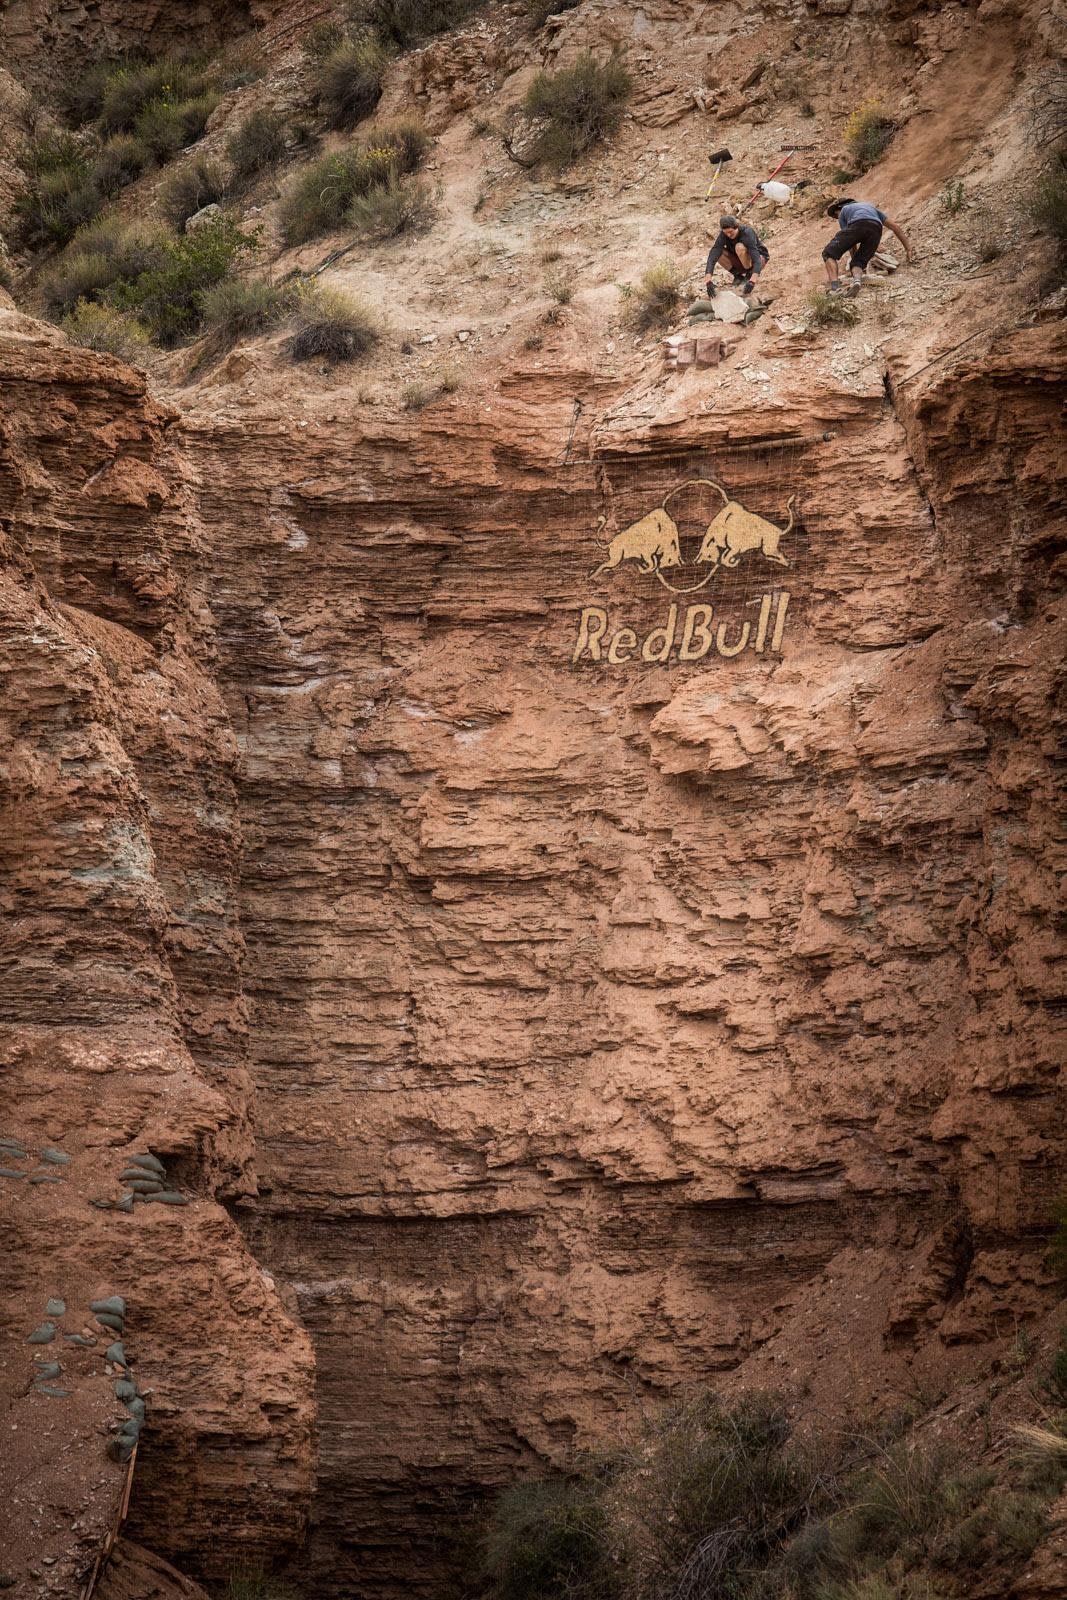 Photo Gallery Day 2 at Red Bull Rampage 2013